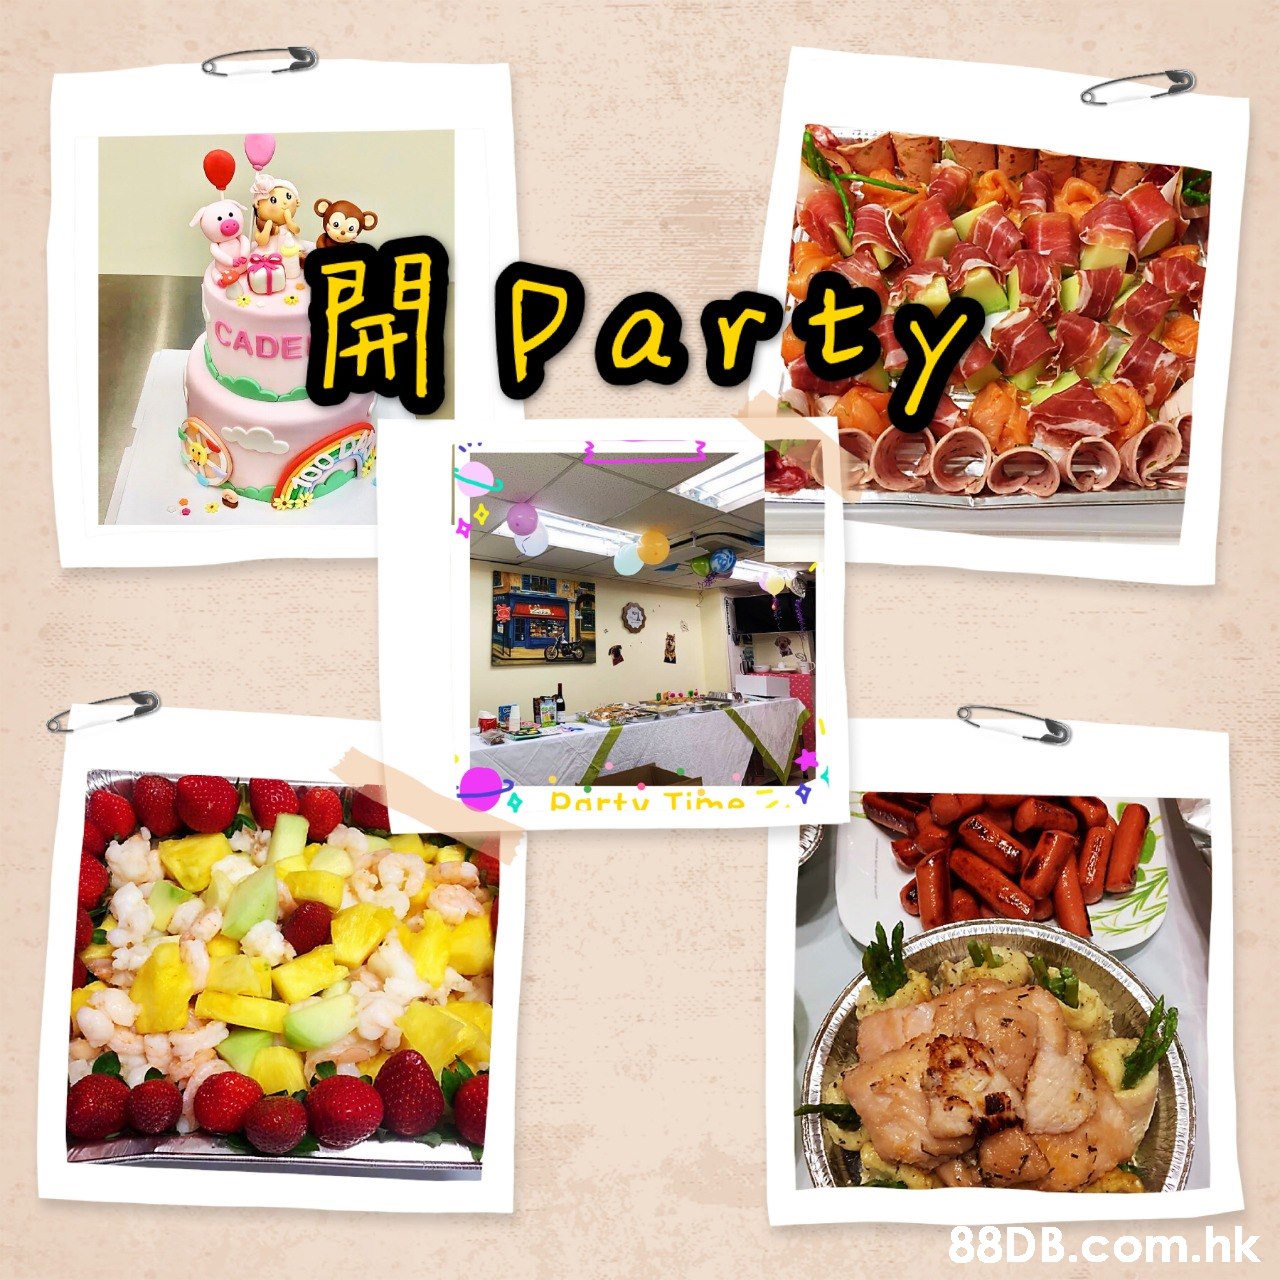 P Party CADE Party Time .hk  Cuisine,Font,Recipe,Meal,Dish